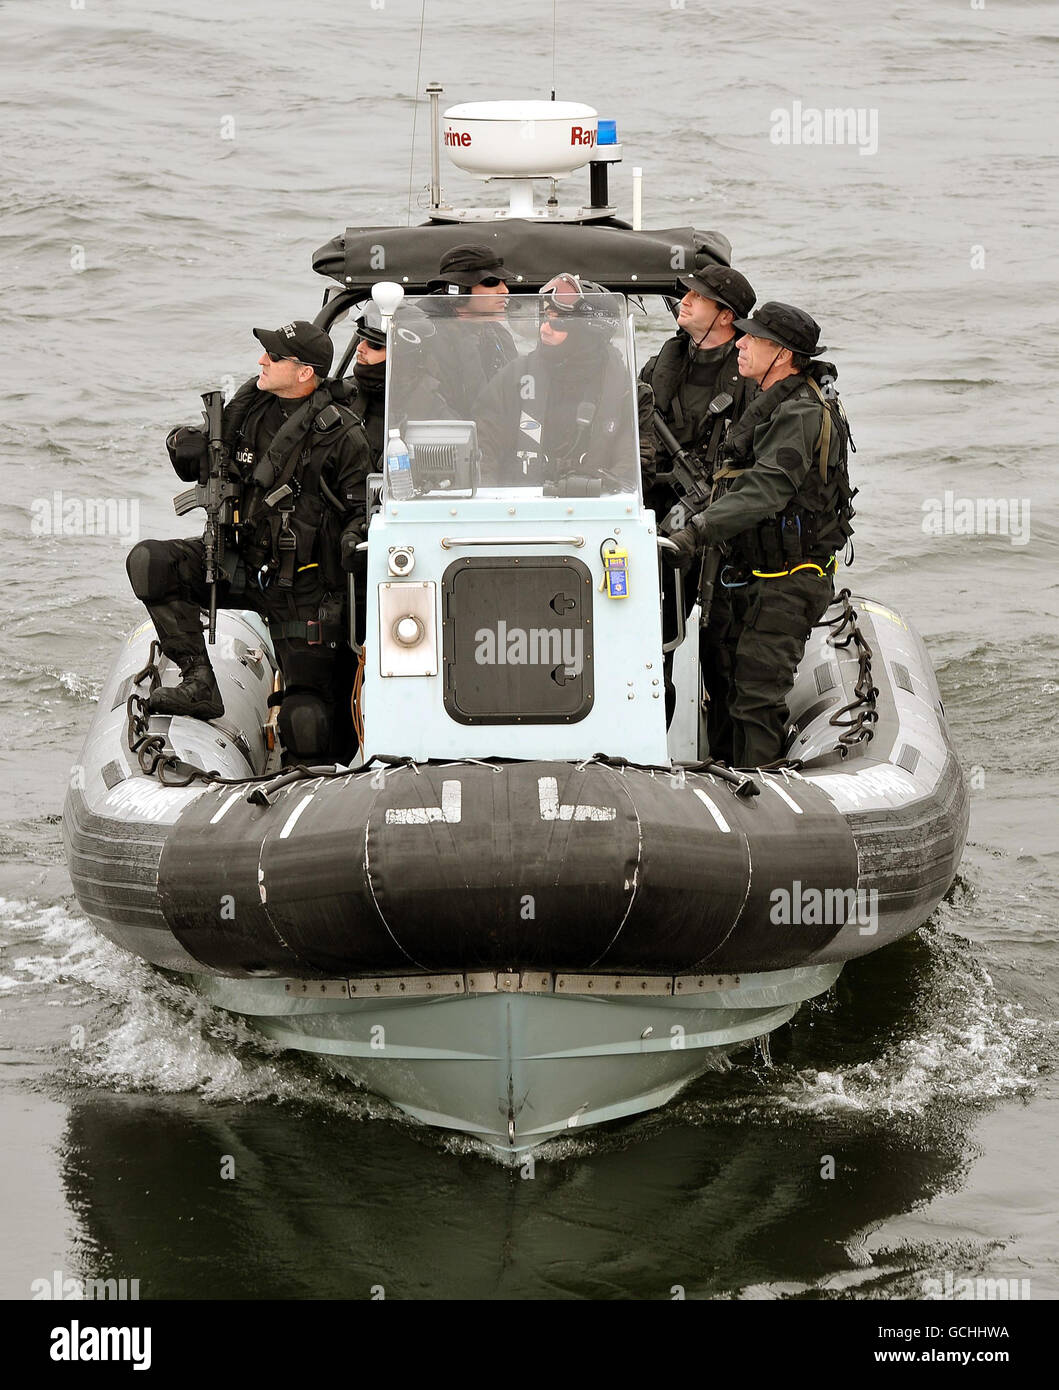 Canadian Police patrol during the Queen's appearance at a Naval review to mark the 100th anniversary of the Canadian Navy, in the waters off Halifax in Nova Scotia, Canada. Stock Photo